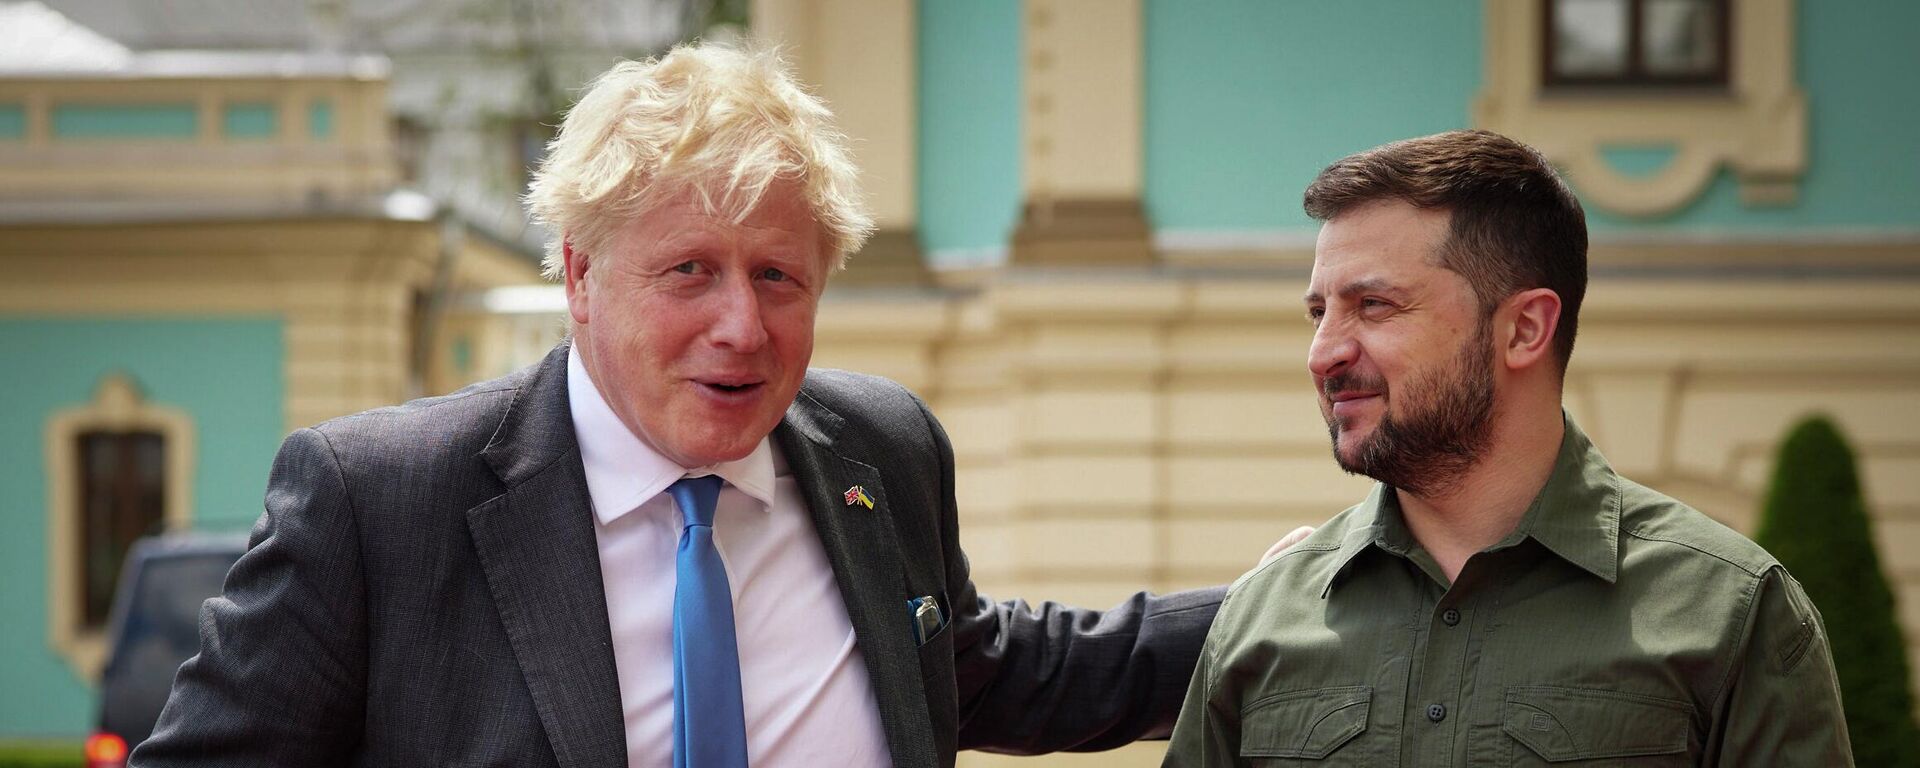 In this image provided by the Ukrainian Presidential Press Office, Ukrainian President Volodymyr Zelenskyy, right, and Britain's Prime Minister Boris Johnson, ahead of their meeting in Kyiv, Ukraine, Friday, June 17, 2022. (Ukrainian Presidential Press Office via AP) - Sputnik International, 1920, 20.06.2022